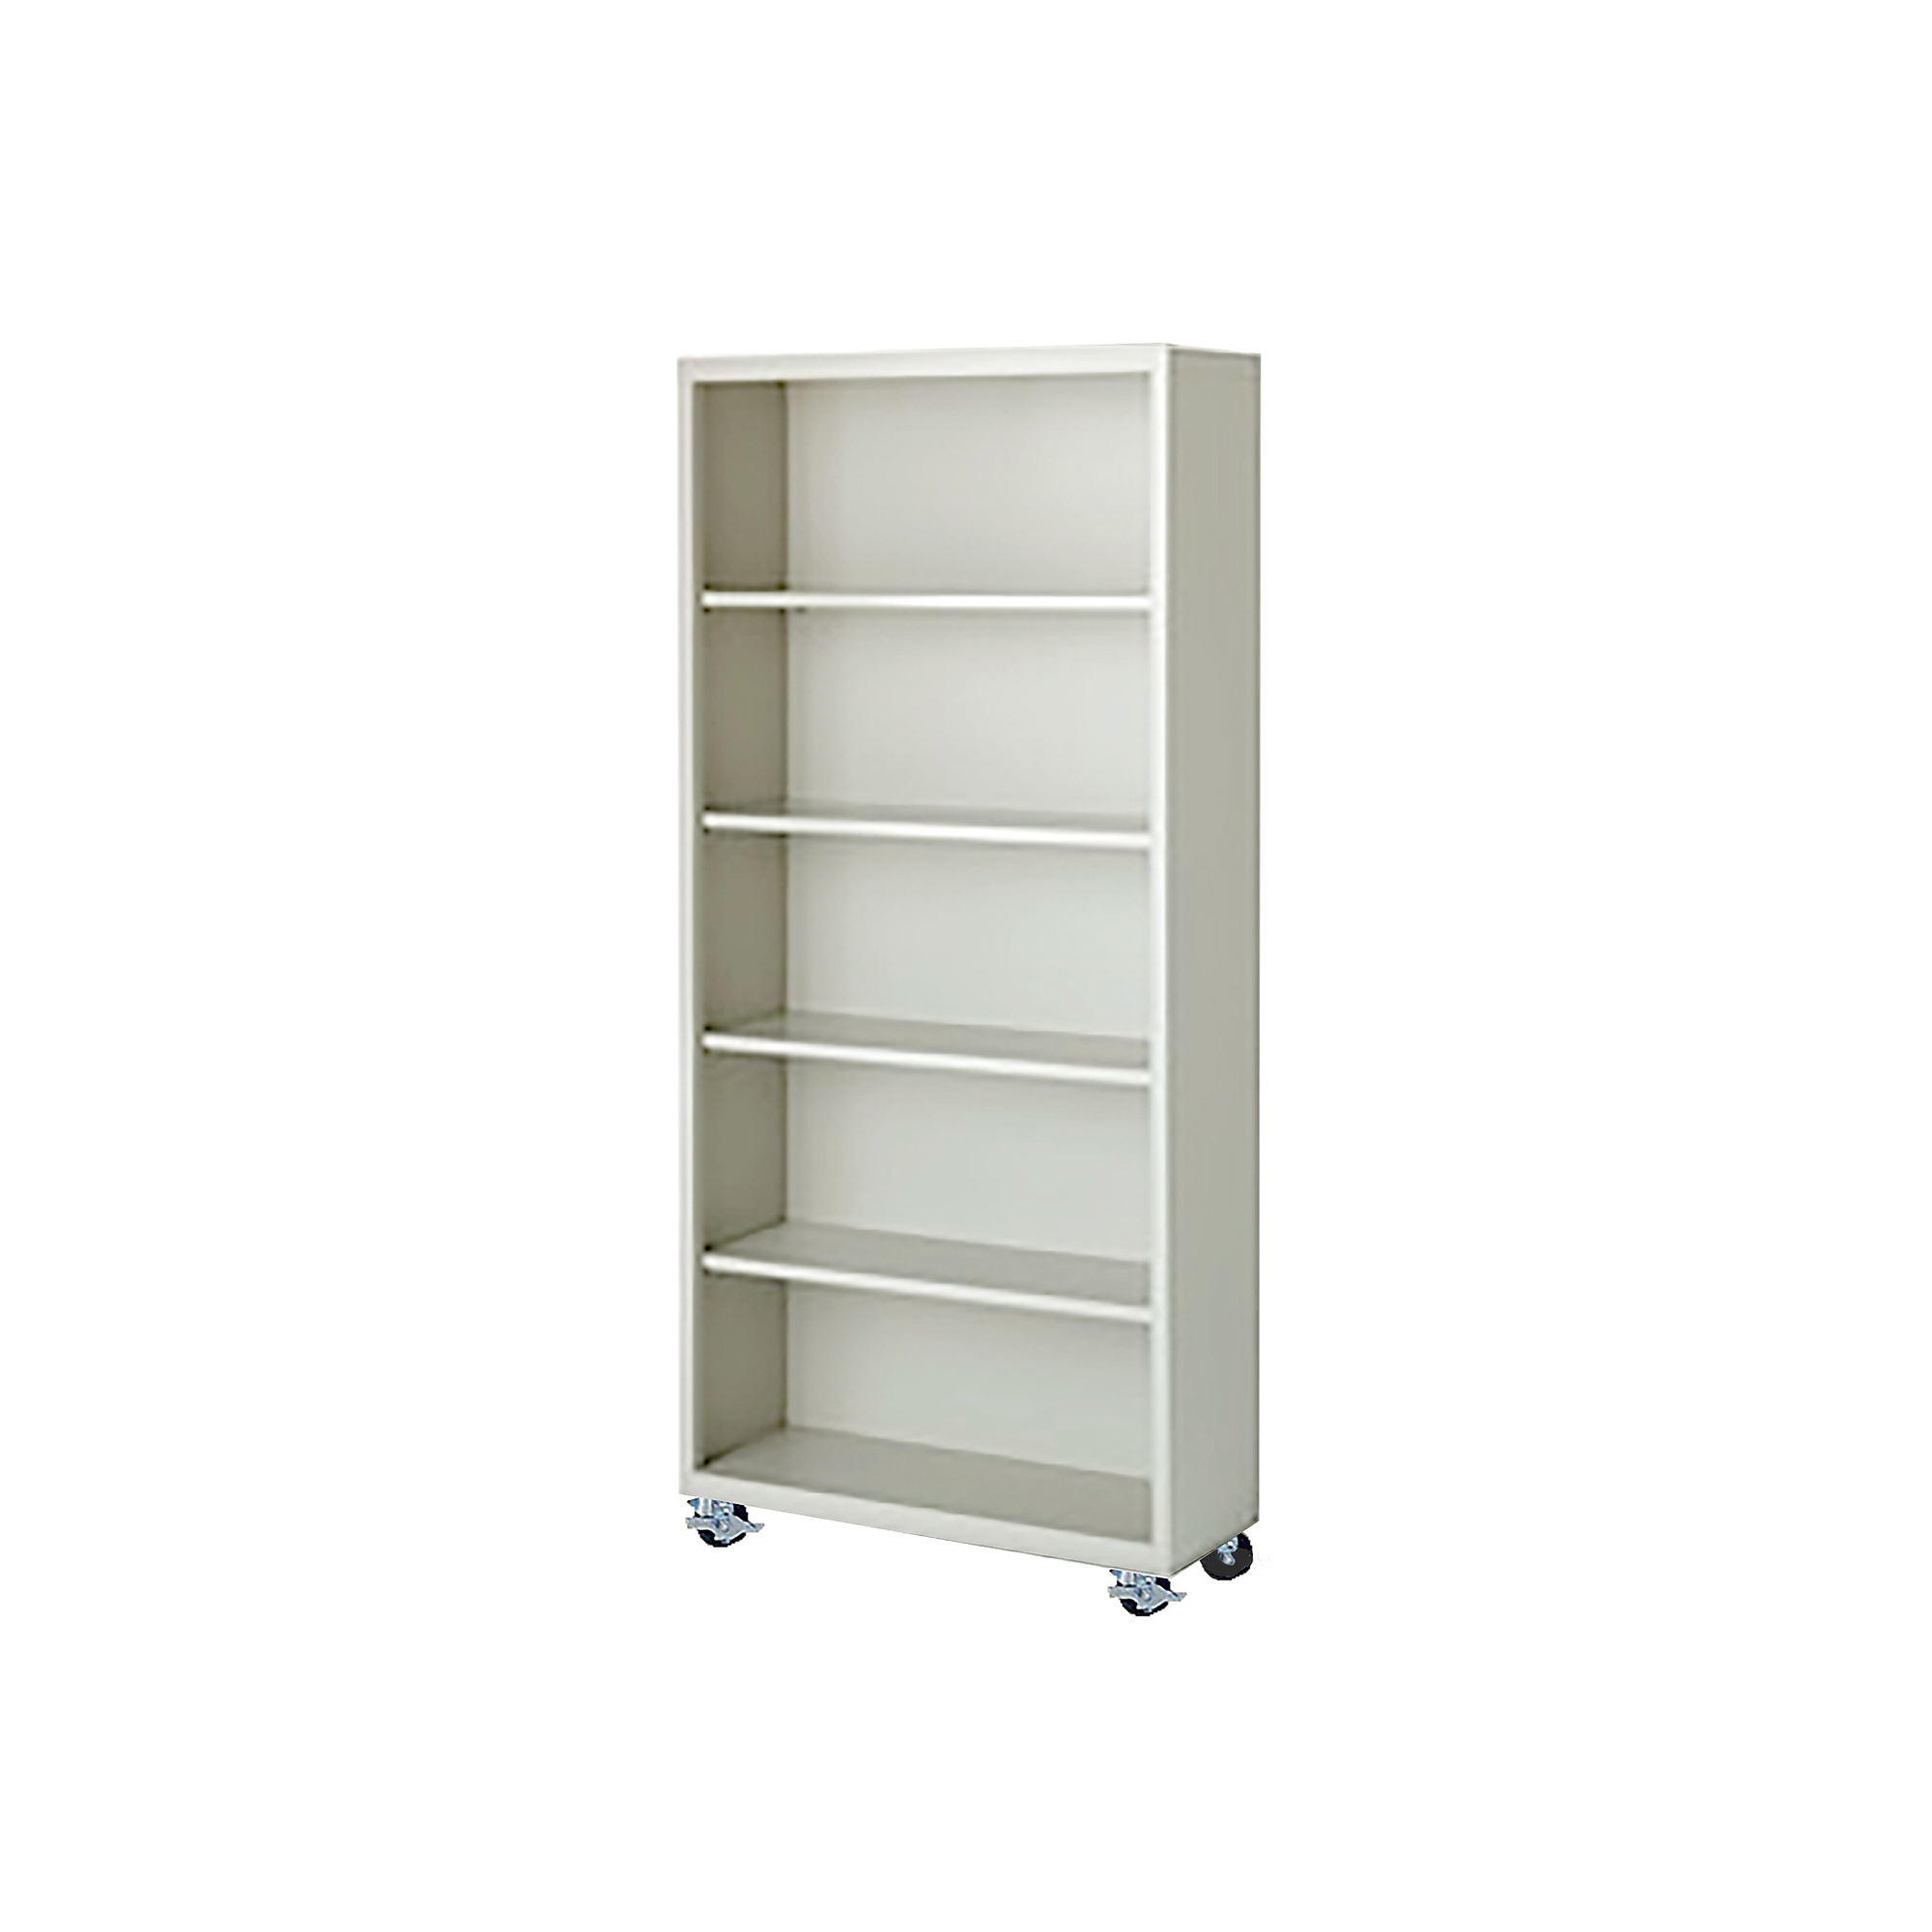 Steel Cabinets USA, 36Inchx18Inchx75Inch Putty Mobile Bookcase Fully Assembled, Height 75 in, Shelves (qty.) 5, Material Steel, Model MBCA-367518-P